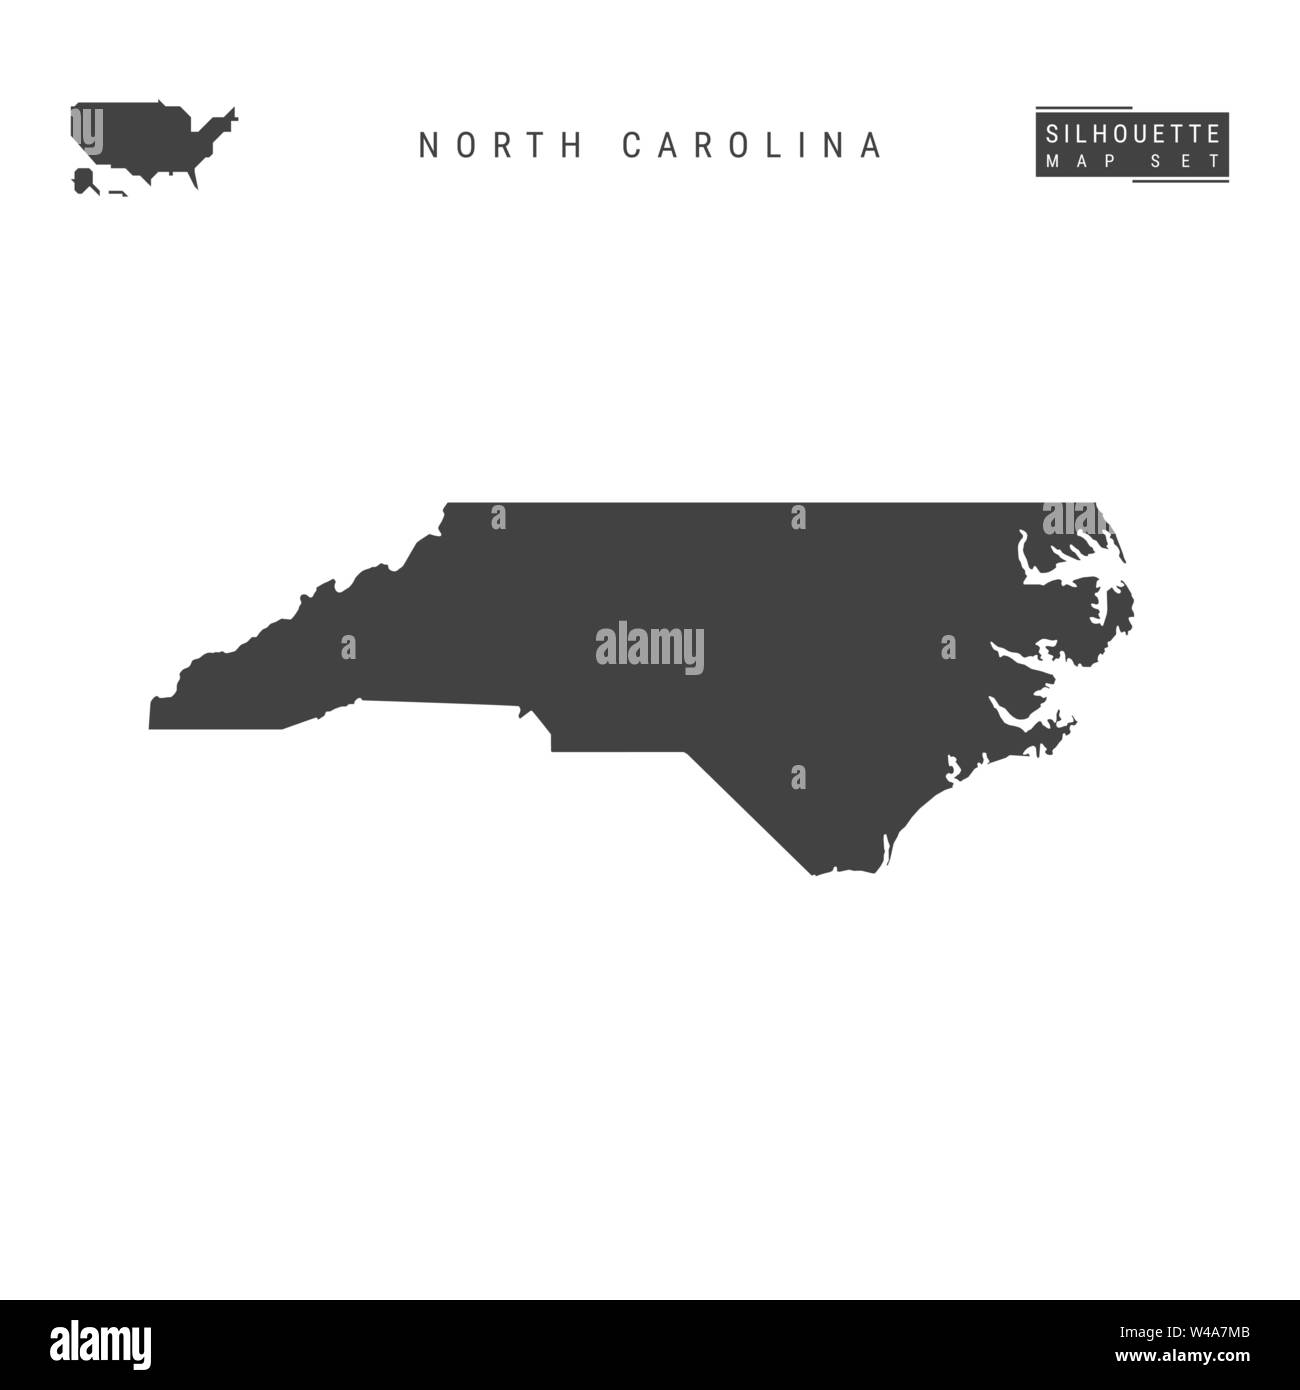 North Carolina US State Blank Vector Map Isolated on White Background. High-Detailed Black Silhouette Map of North Carolina. Stock Vector